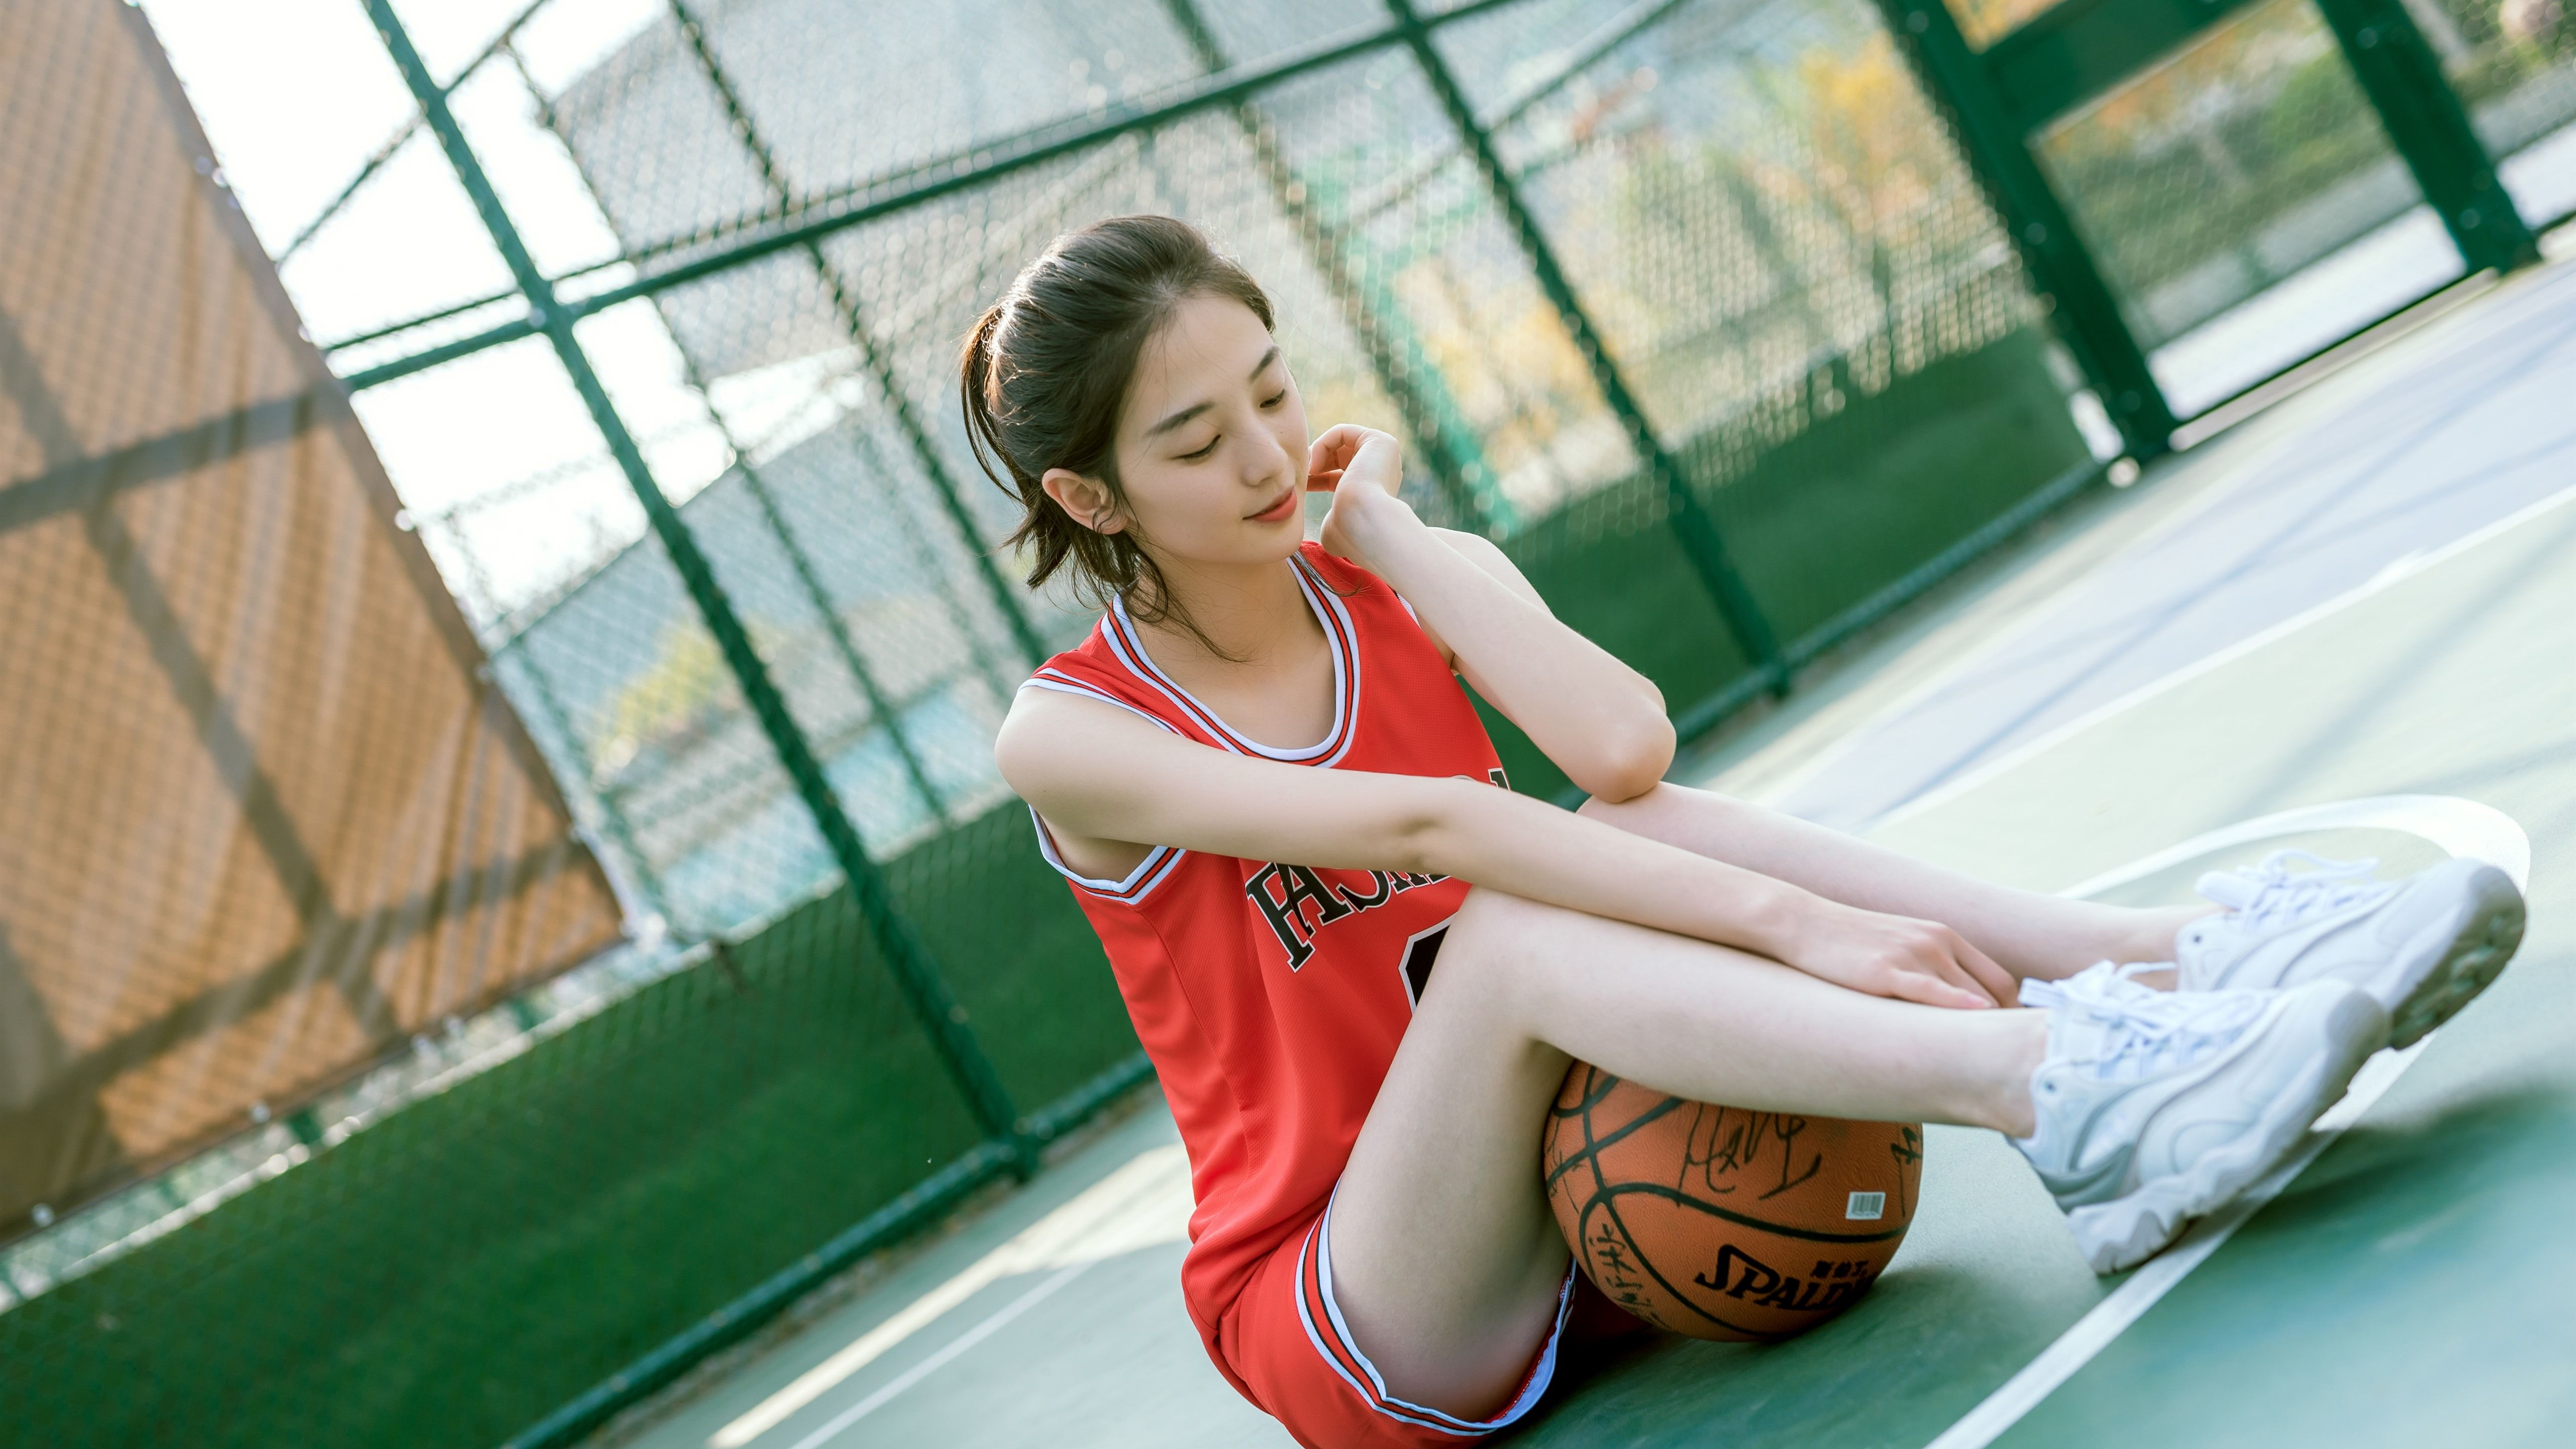 Basketball Wallpapers For Girls - Home decoration Cute Selena Gomez HD